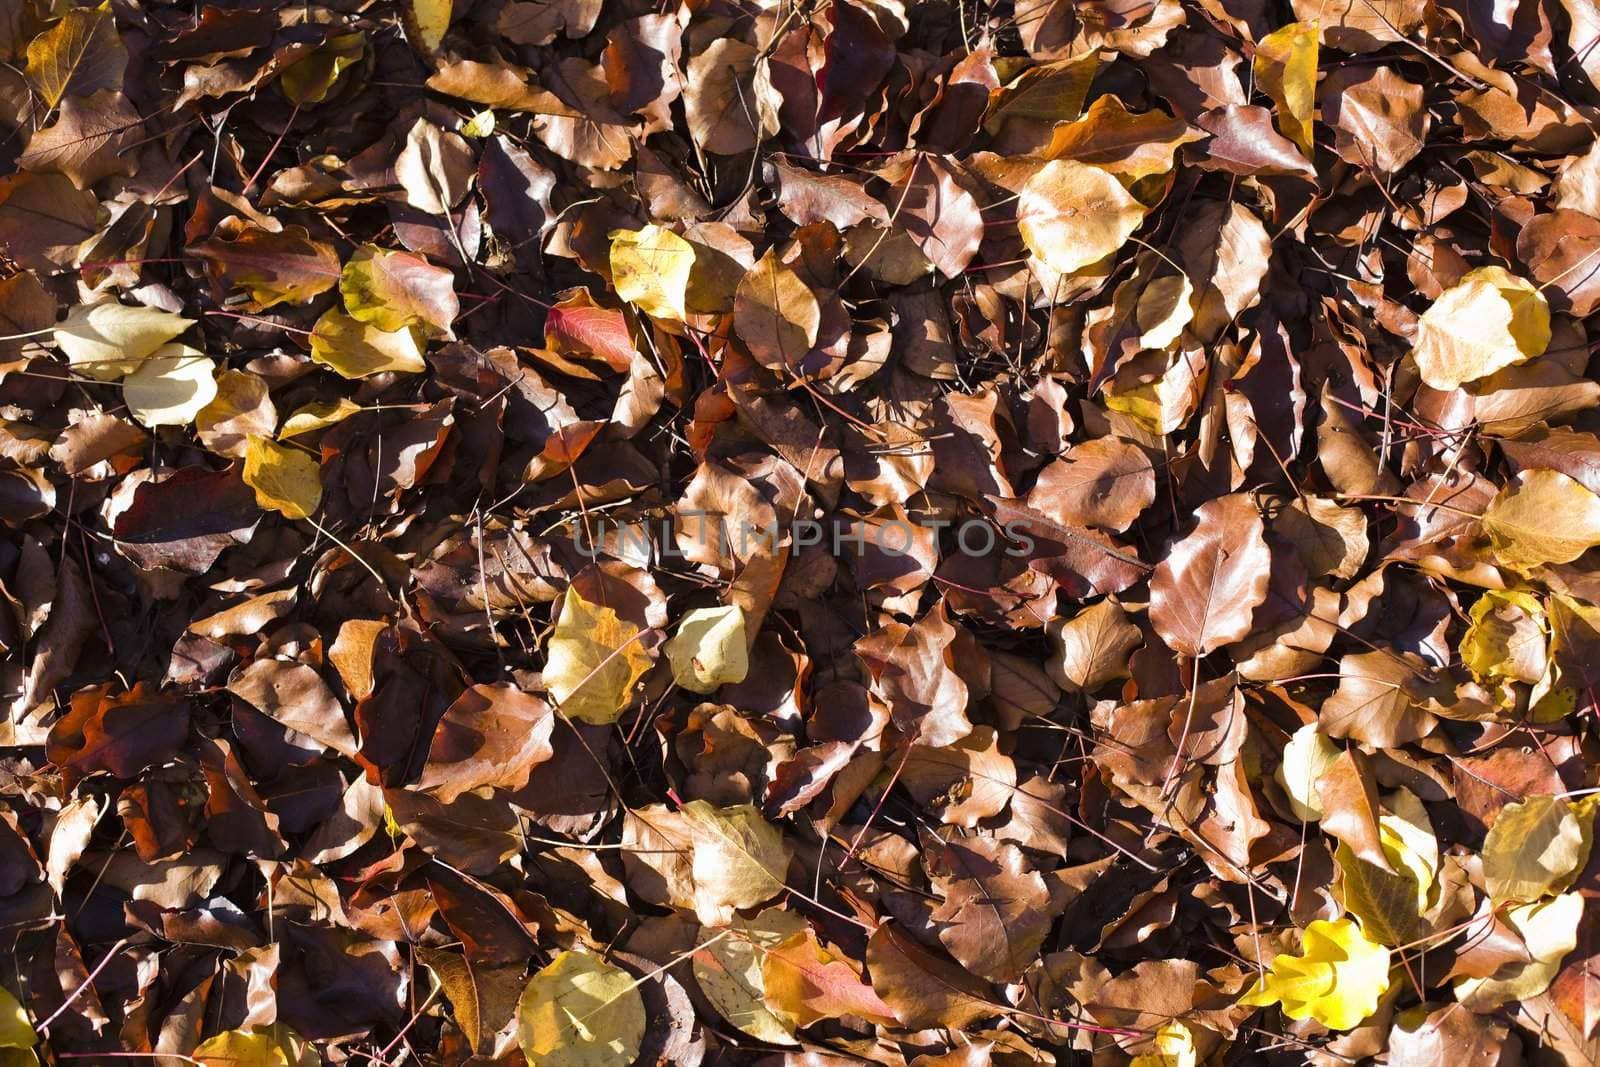 Pile of Brown, Gold, and Yellow Fallen Leaves